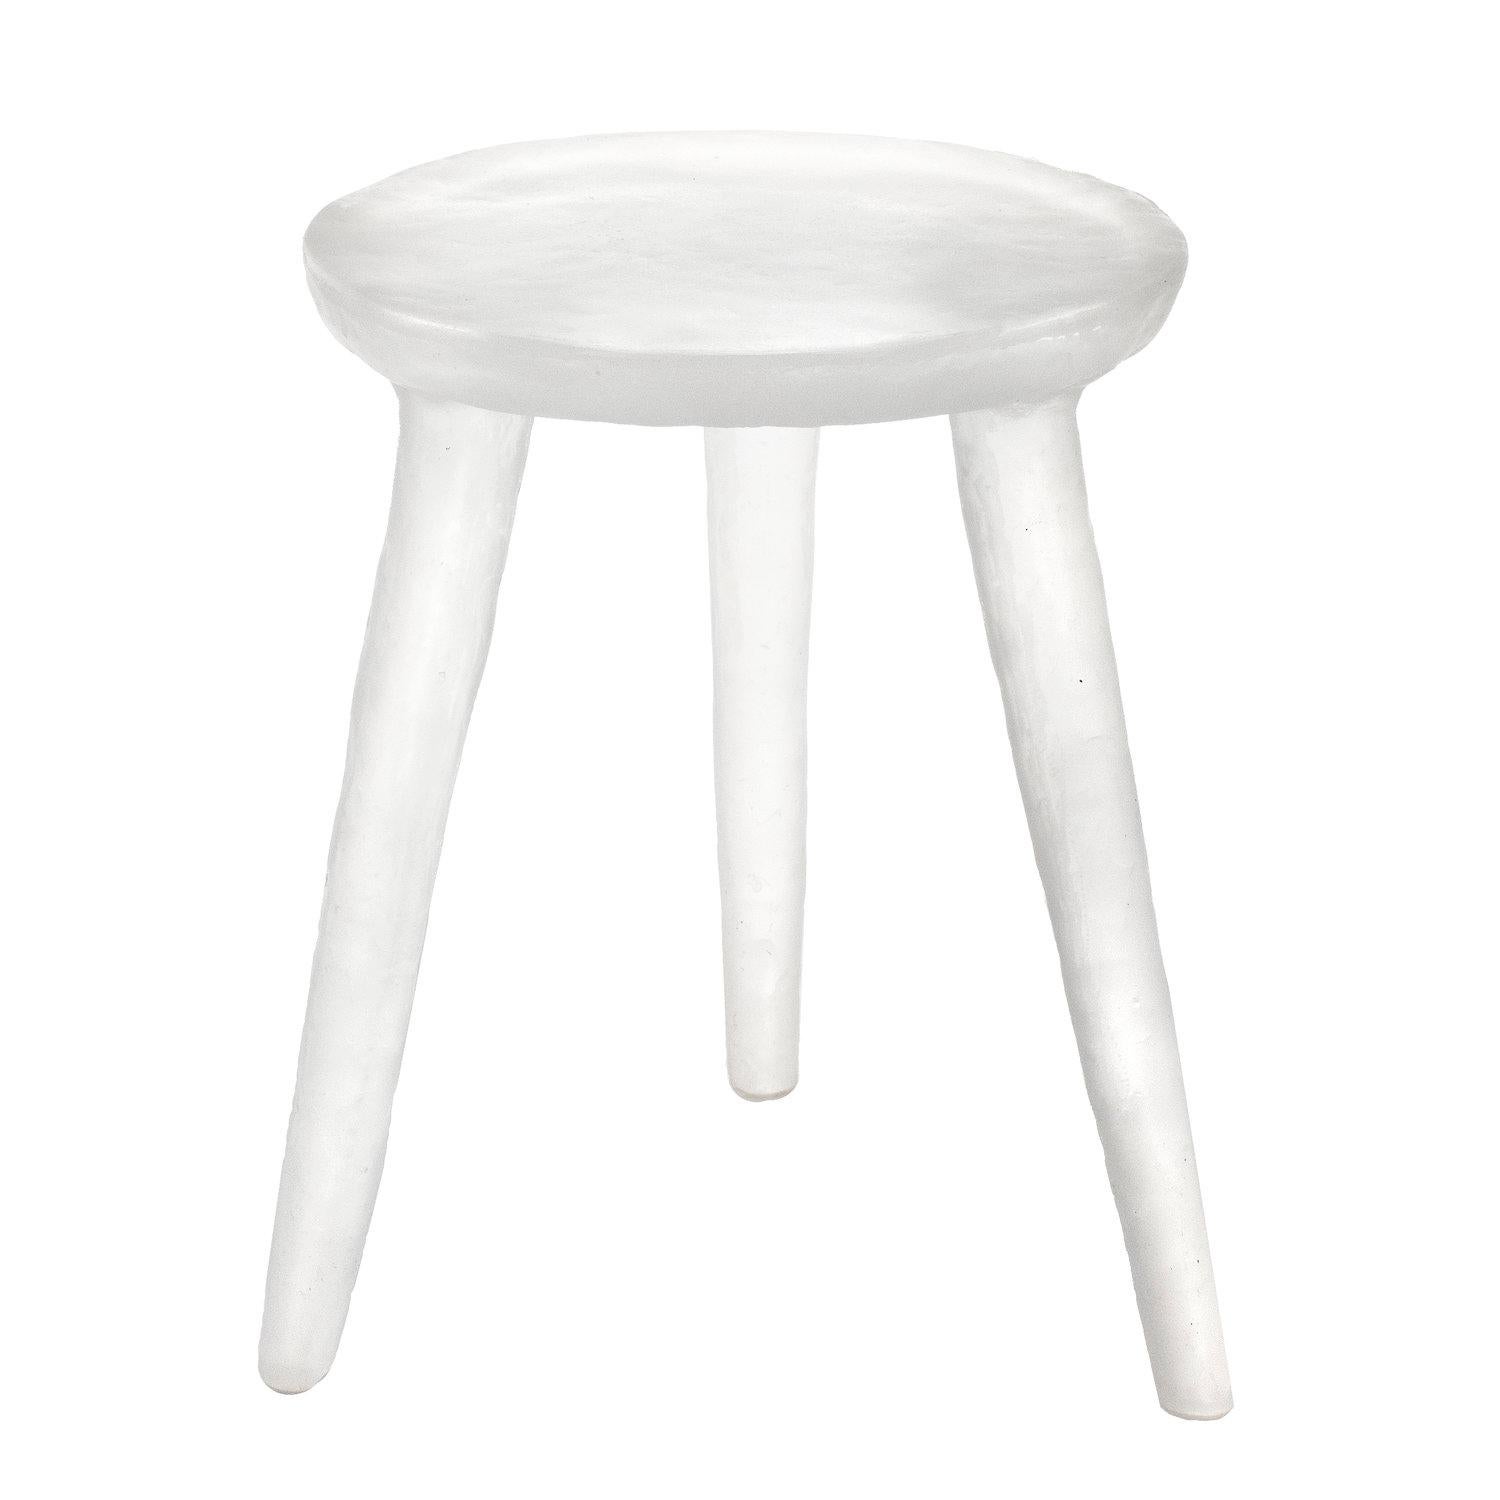 Translucent and whimsical, the Glow side table / stool can be used as a side table or stool. They are handcrafted from a variety of recycled plastics both thermoset and thermoplastic. A specific blend of the plastics is combined in large molds. Once